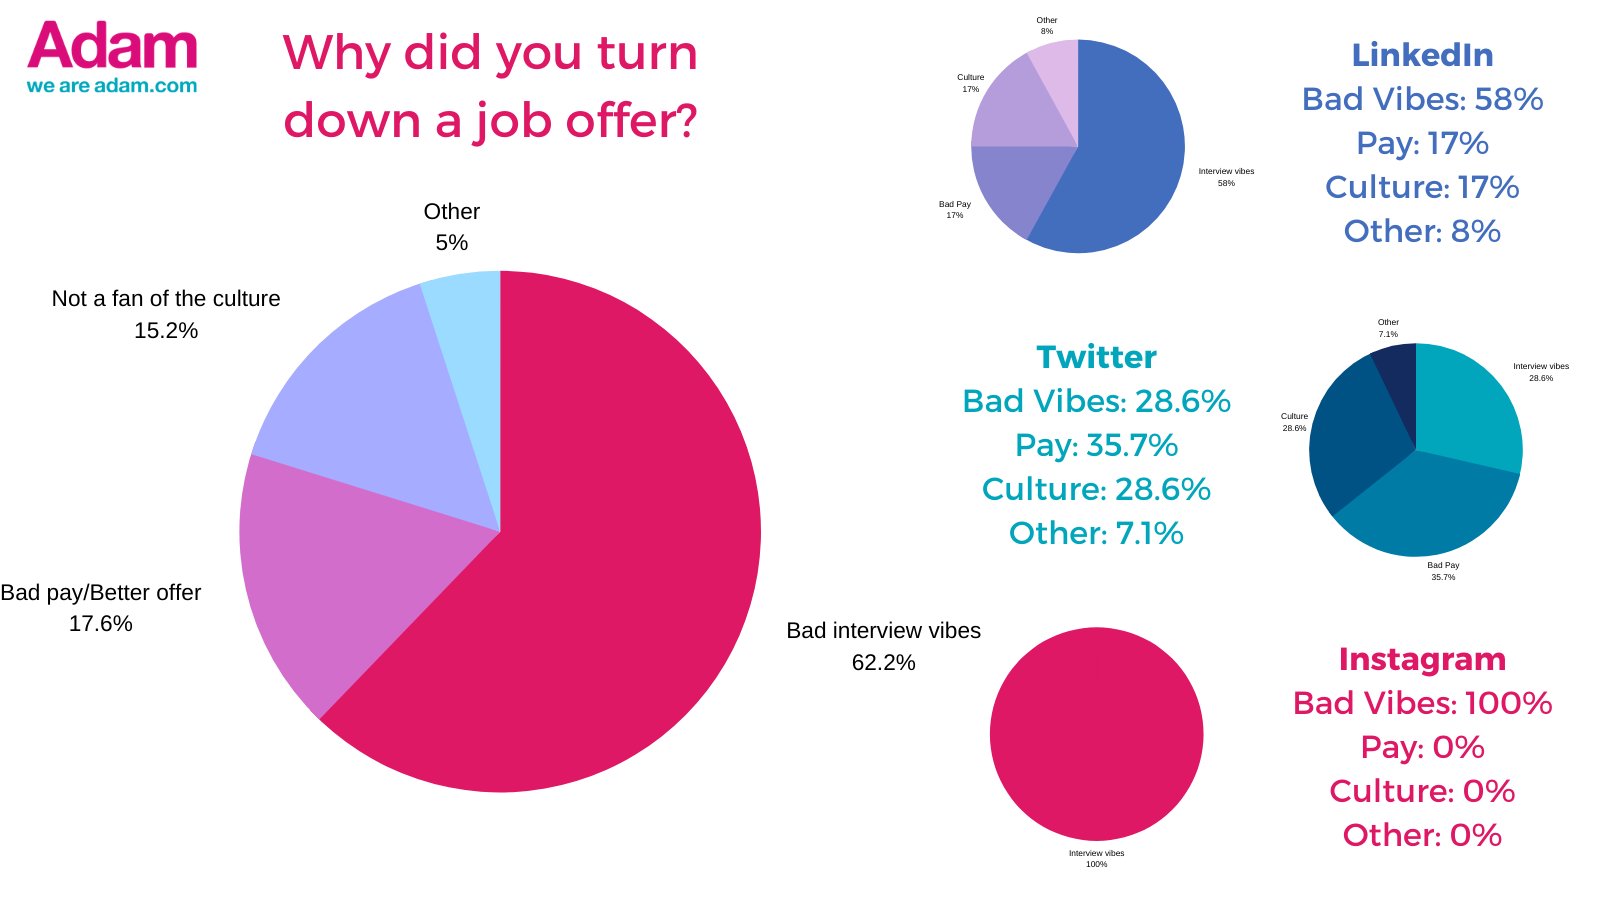 Pie charts showing why respondents had turned down a job offer